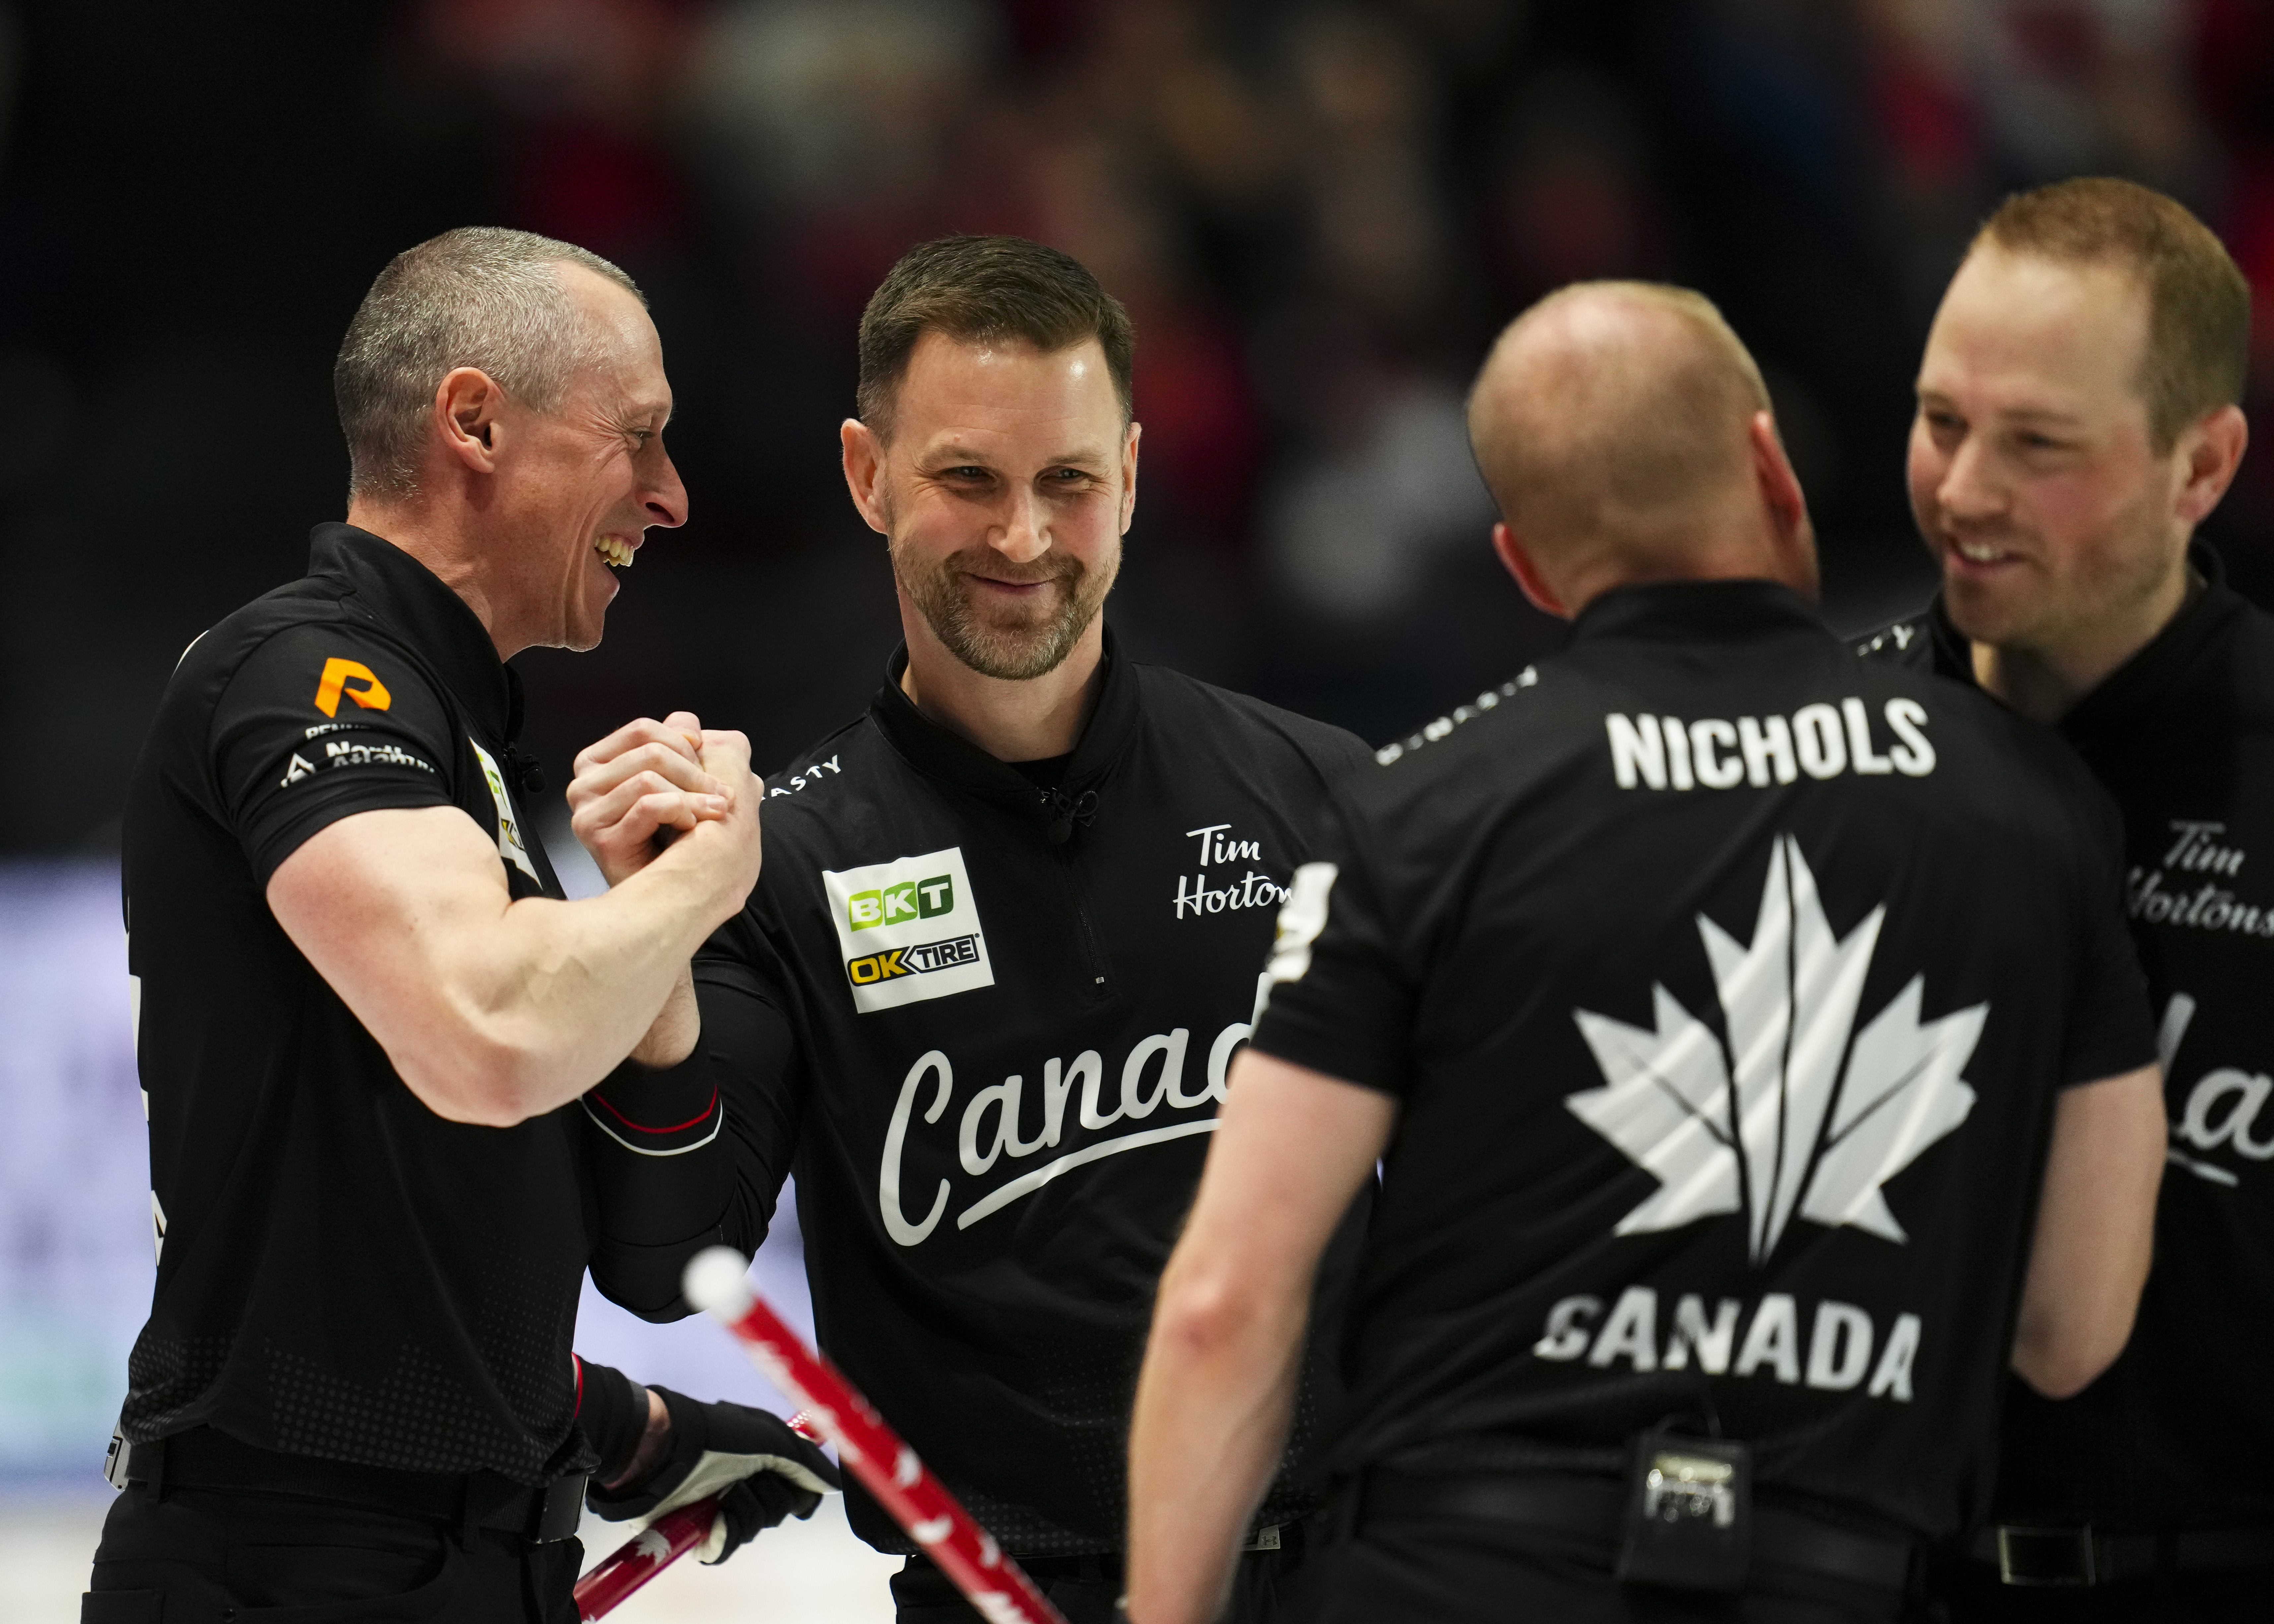 Team Canada advances to gold medal game at Curling Worlds - Team Canada